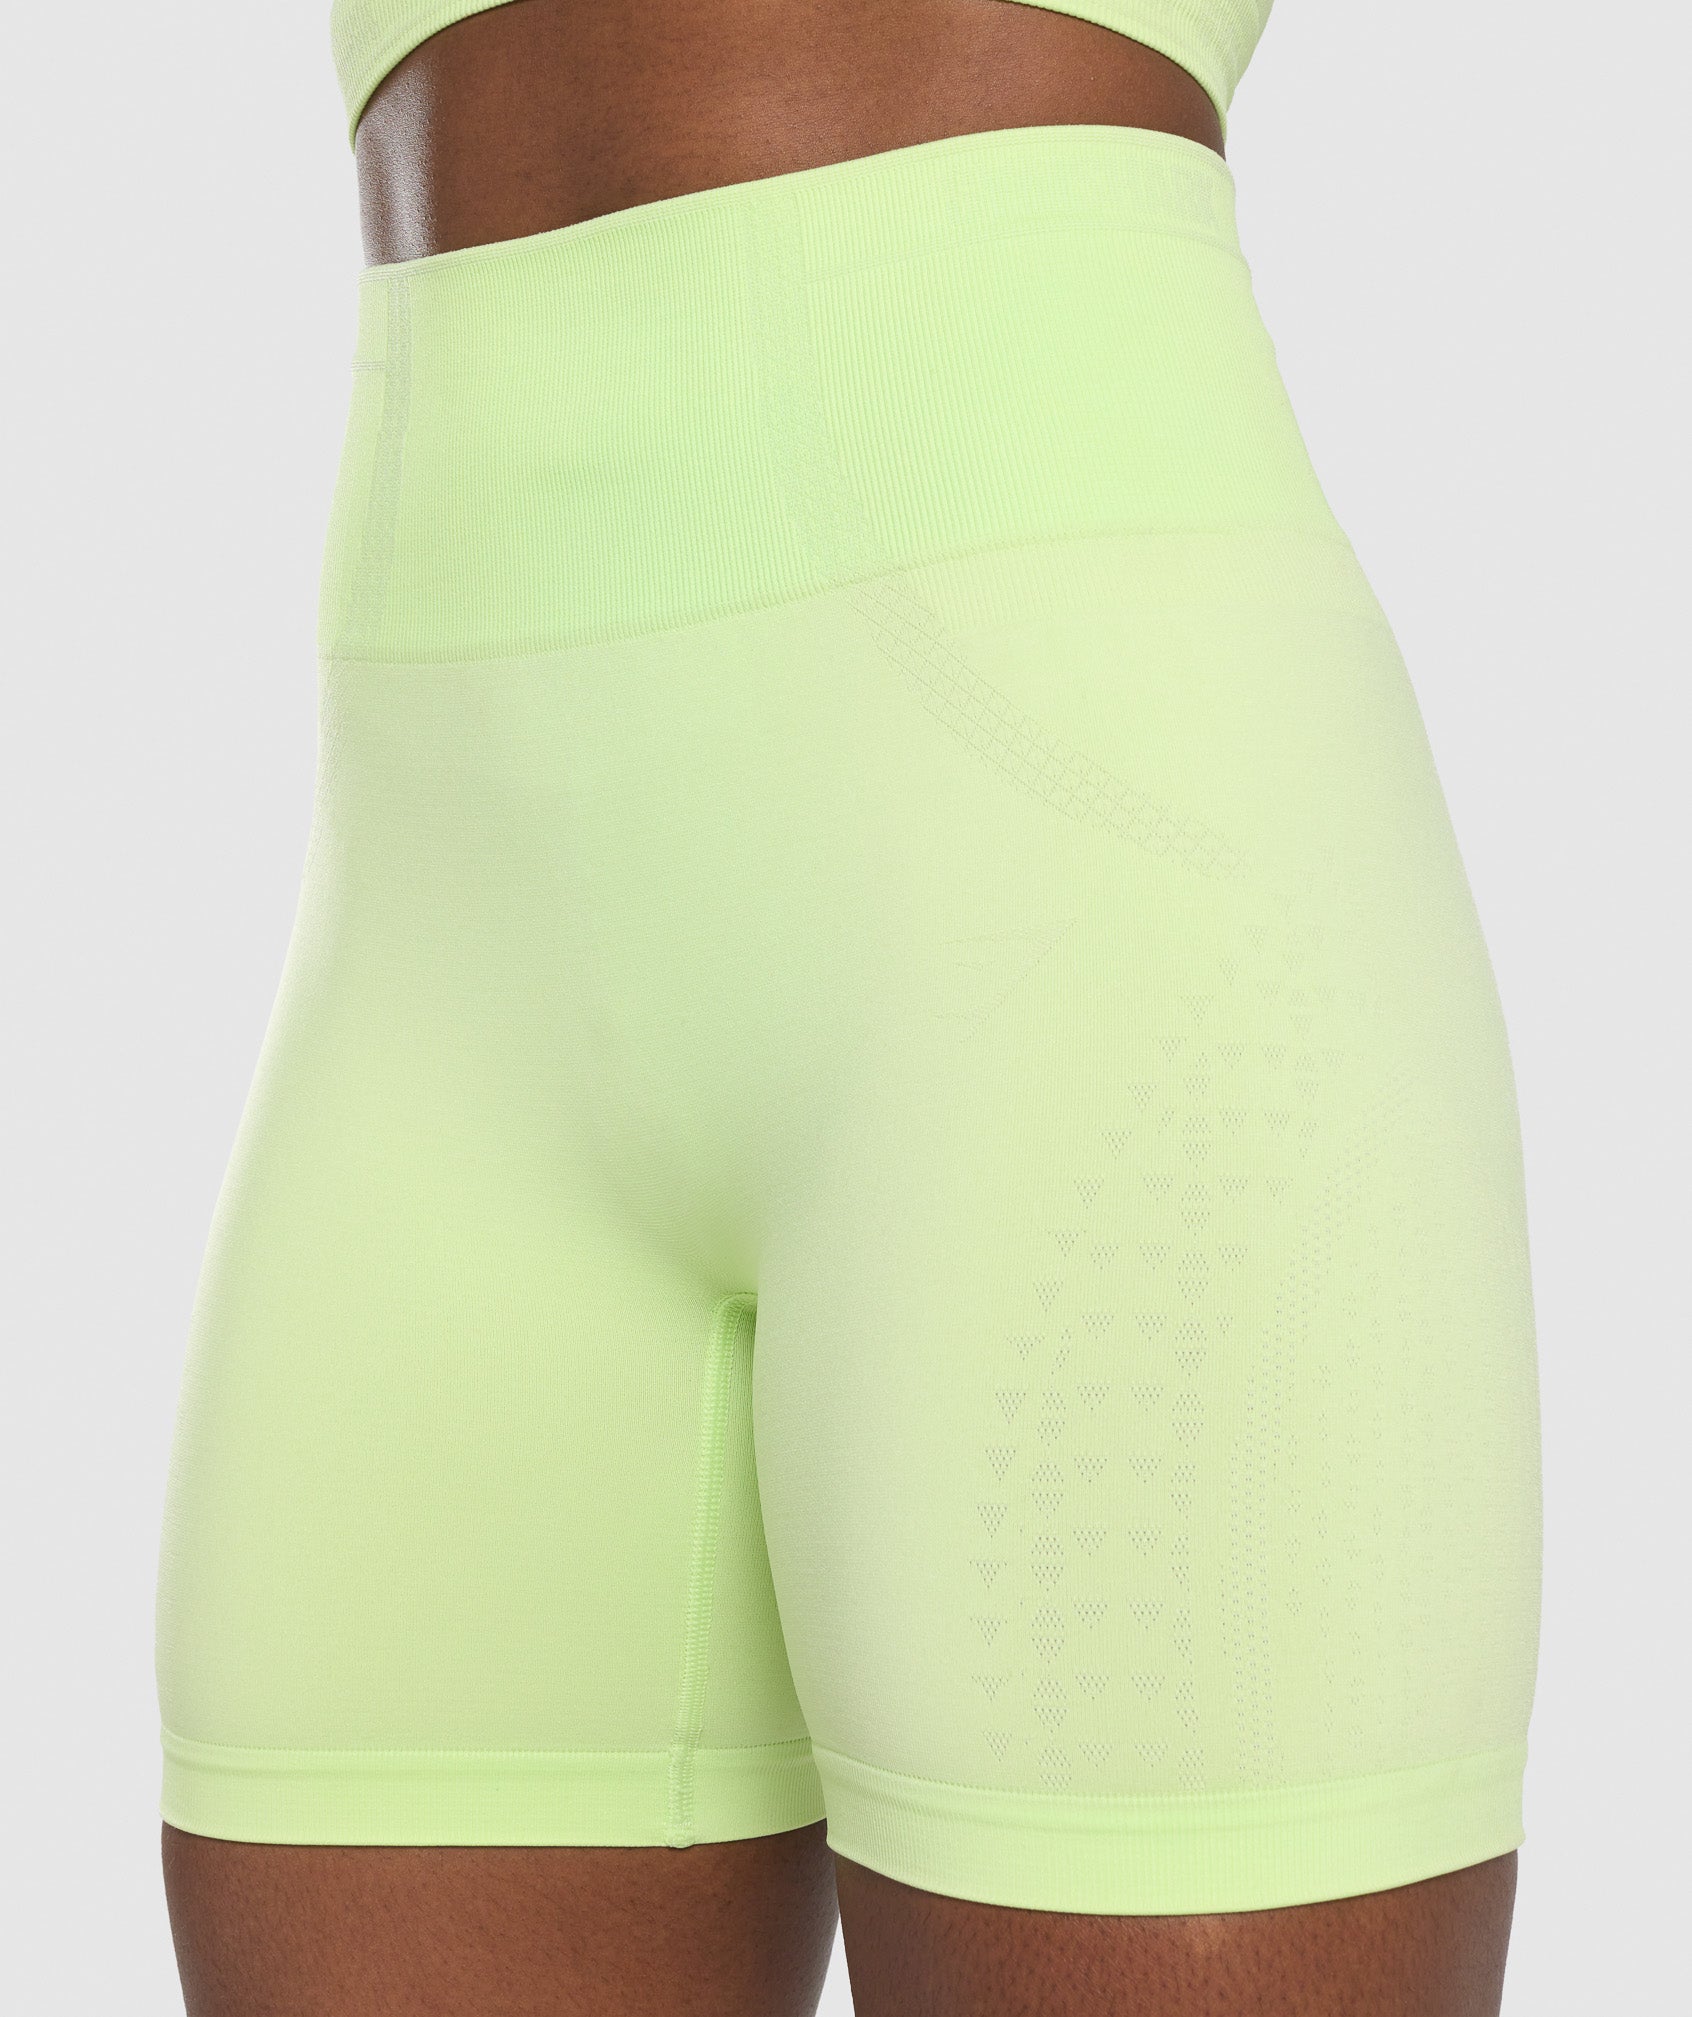 Apex Seamless Shorts in Green/Light Green - view 6